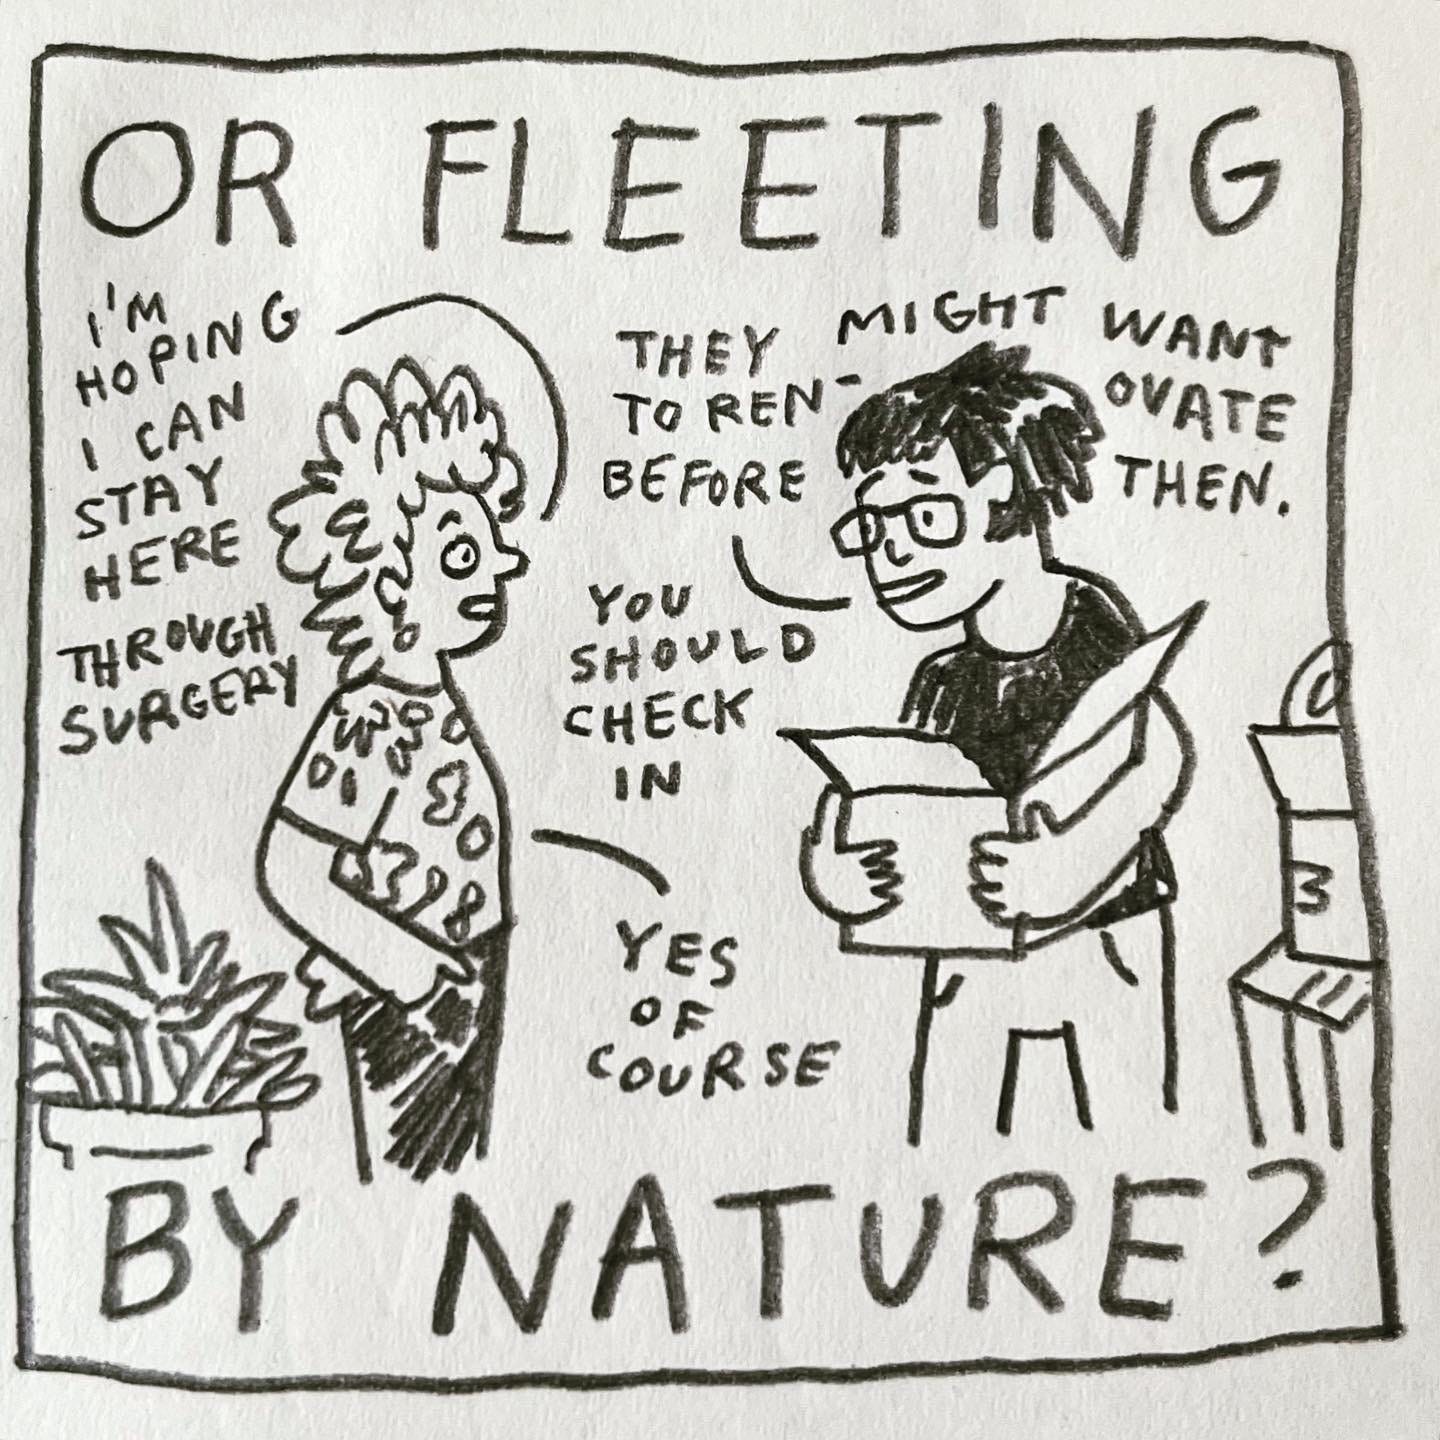 Panel 2: or fleeting by nature? Image: Lark stands, hands in pockets, talking to a friend with short dark hair and glasses who is holding an open cardboard box. House plants and more boxes are in the background. Lark says "I'm hoping I can stay here through surgery." Their friend replies "they might want to renovate before then. You should check in." Lark says “yes of course"